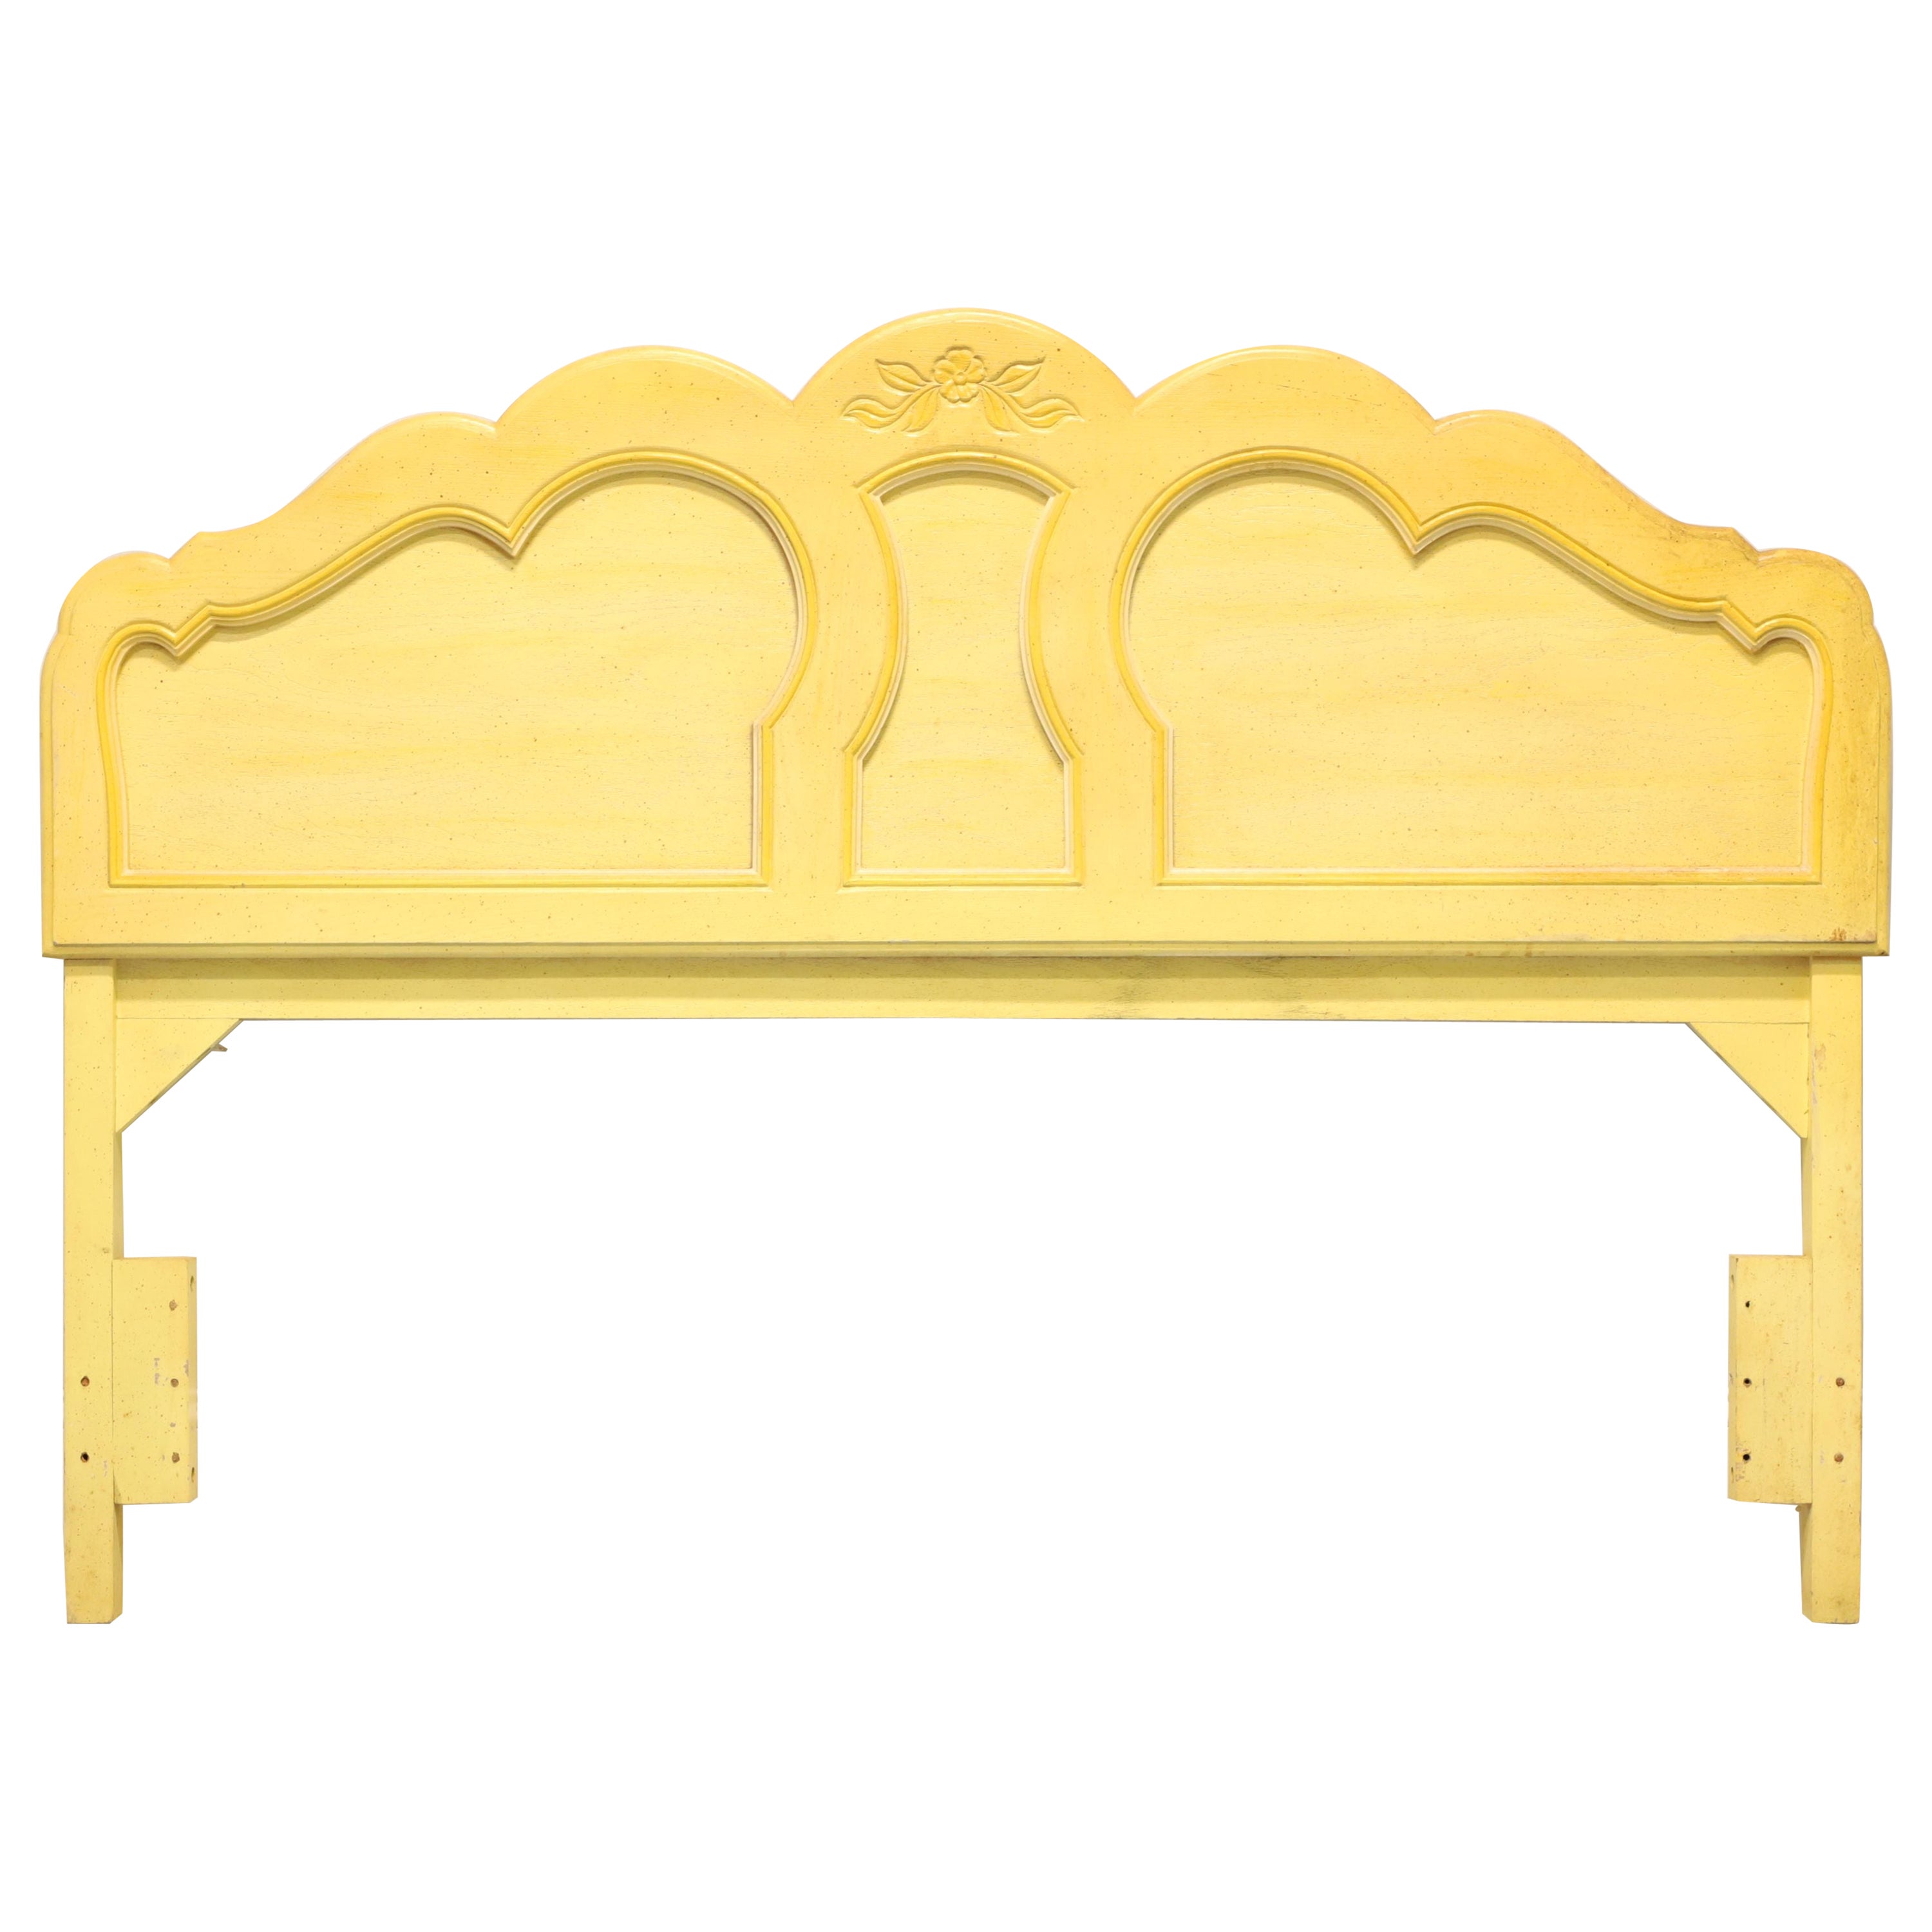 Mid 20th Century Yellow French Country Full Size Headboard For Sale